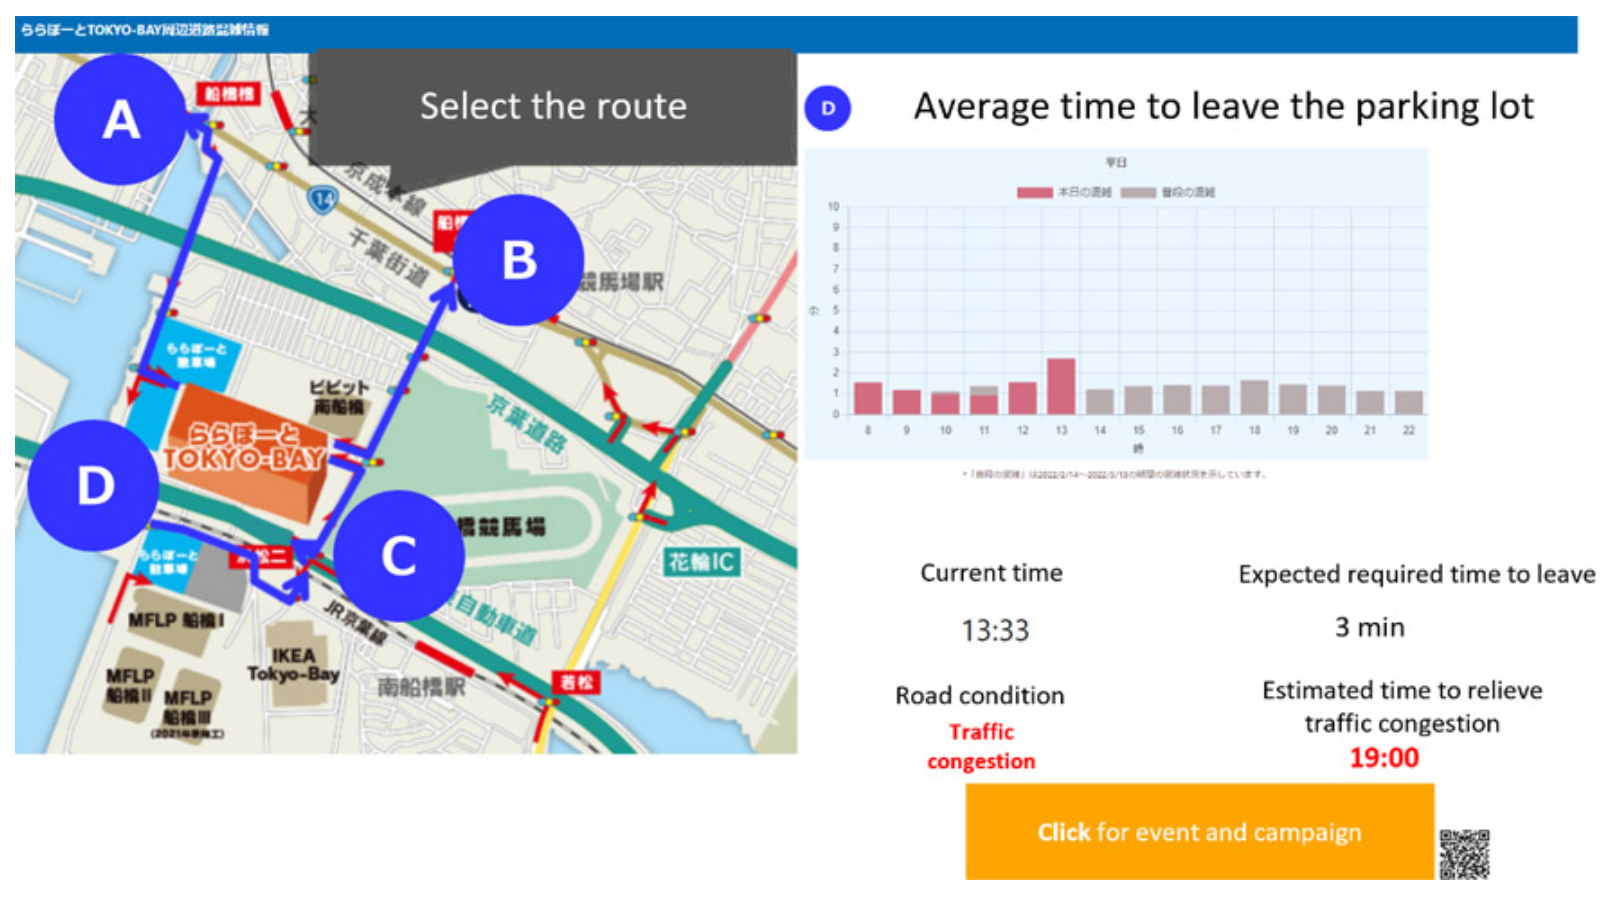 NTT DATA launches a Connected Car Data Initiative to reduce traffic congestion and CO2 emissions partnering with TOYOTA & Mitsui Fudosan